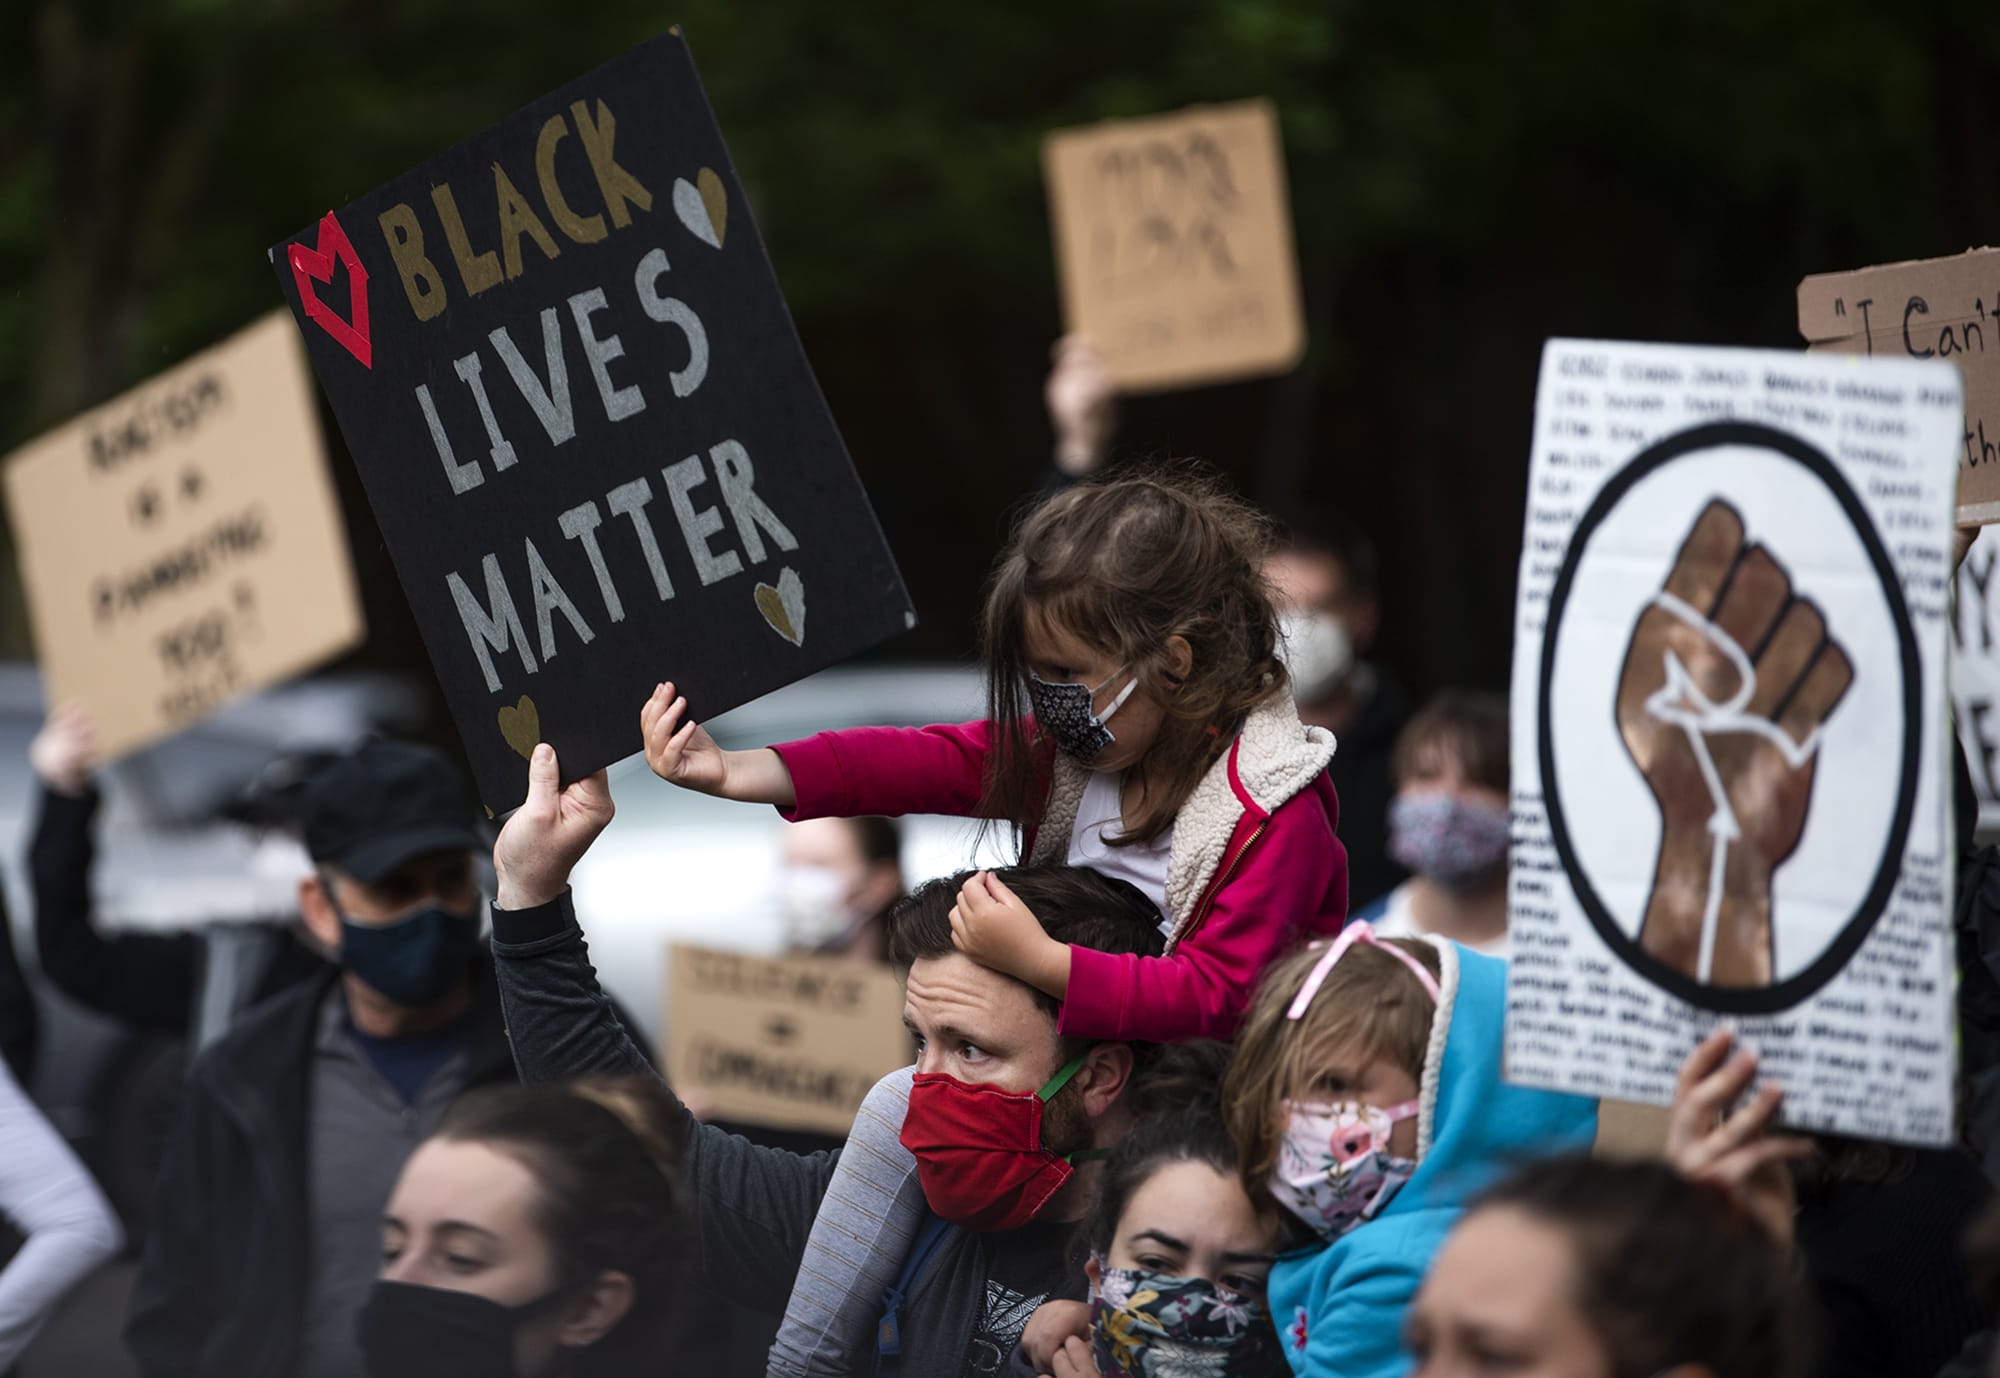 Clementine Tomerlin of Vancouver, 5, helps her dad, Clay, hold up a sign as they join hundreds of people for a peaceful protest against police brutality outside Clark County Courthouse in Vancouver on June 5, 2020.